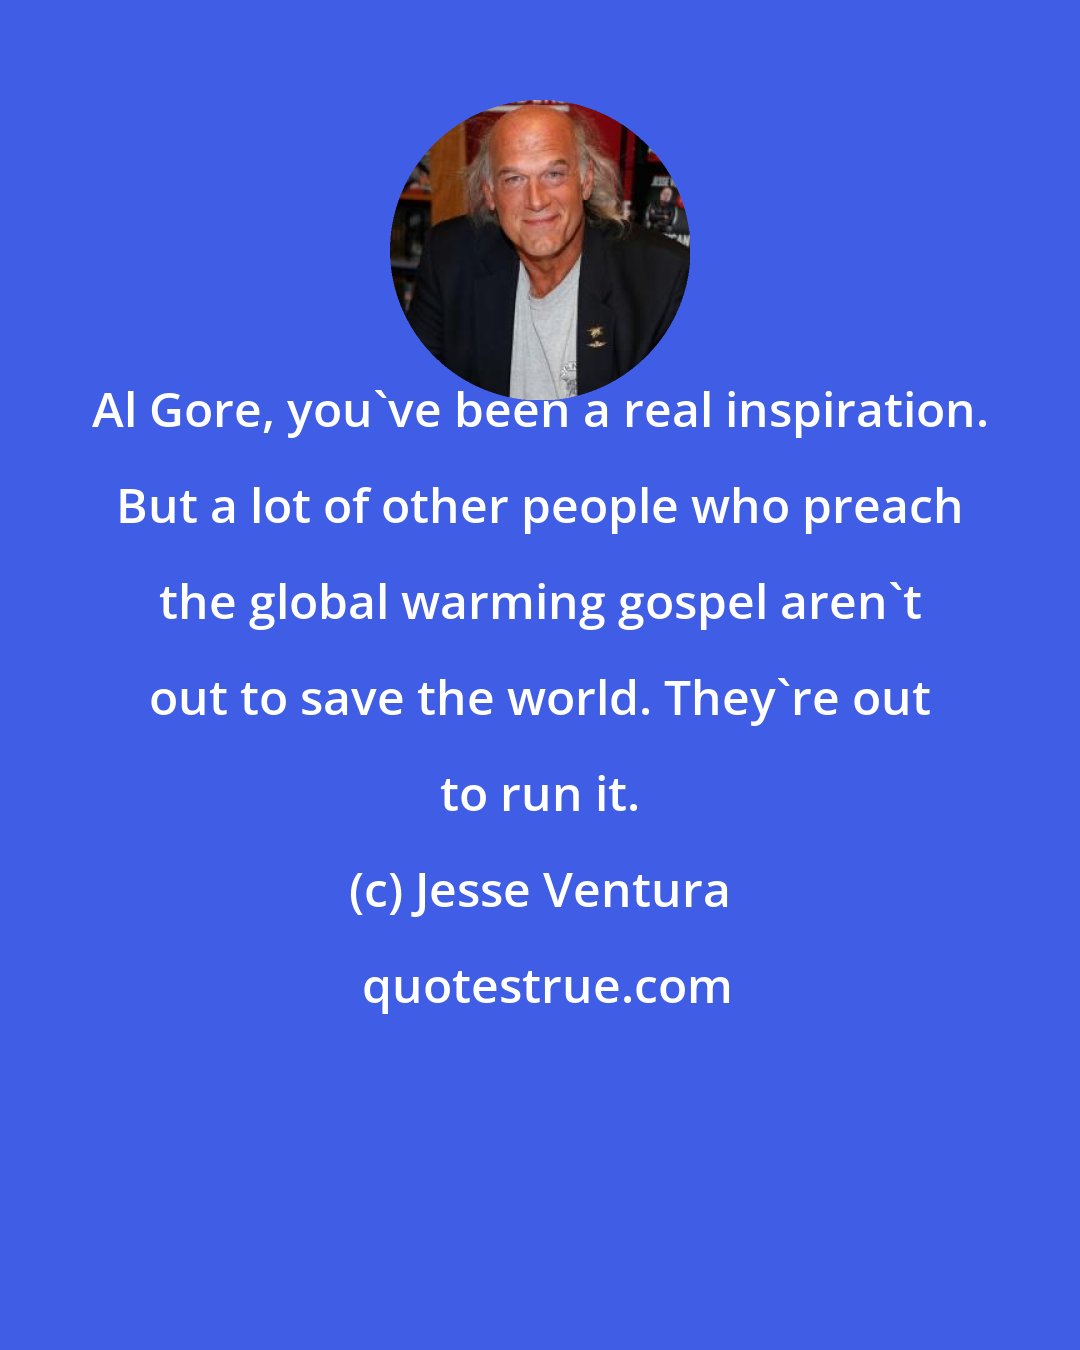 Jesse Ventura: Al Gore, you've been a real inspiration. But a lot of other people who preach the global warming gospel aren't out to save the world. They're out to run it.